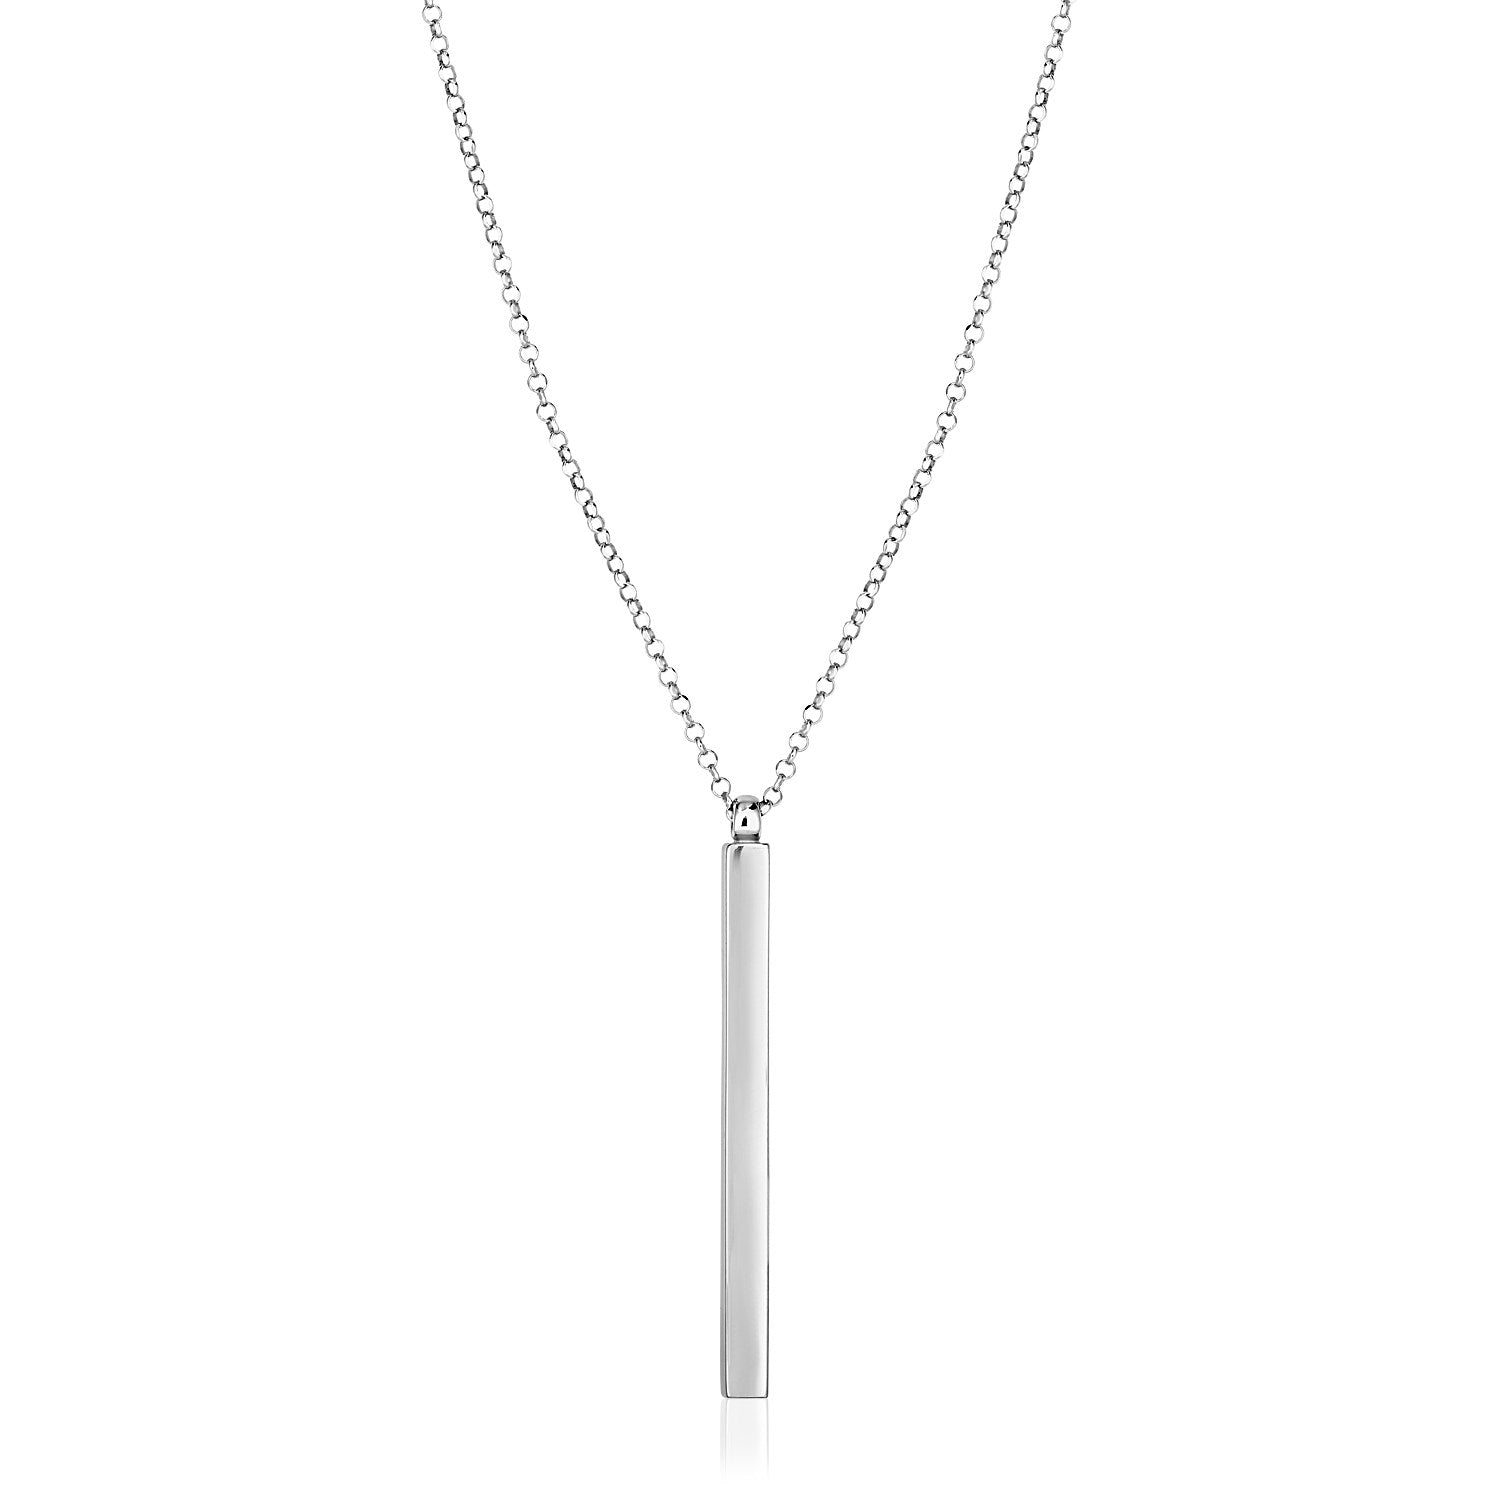 Sterling Silver 24 inch Necklace with Long Polished Bar Pendant